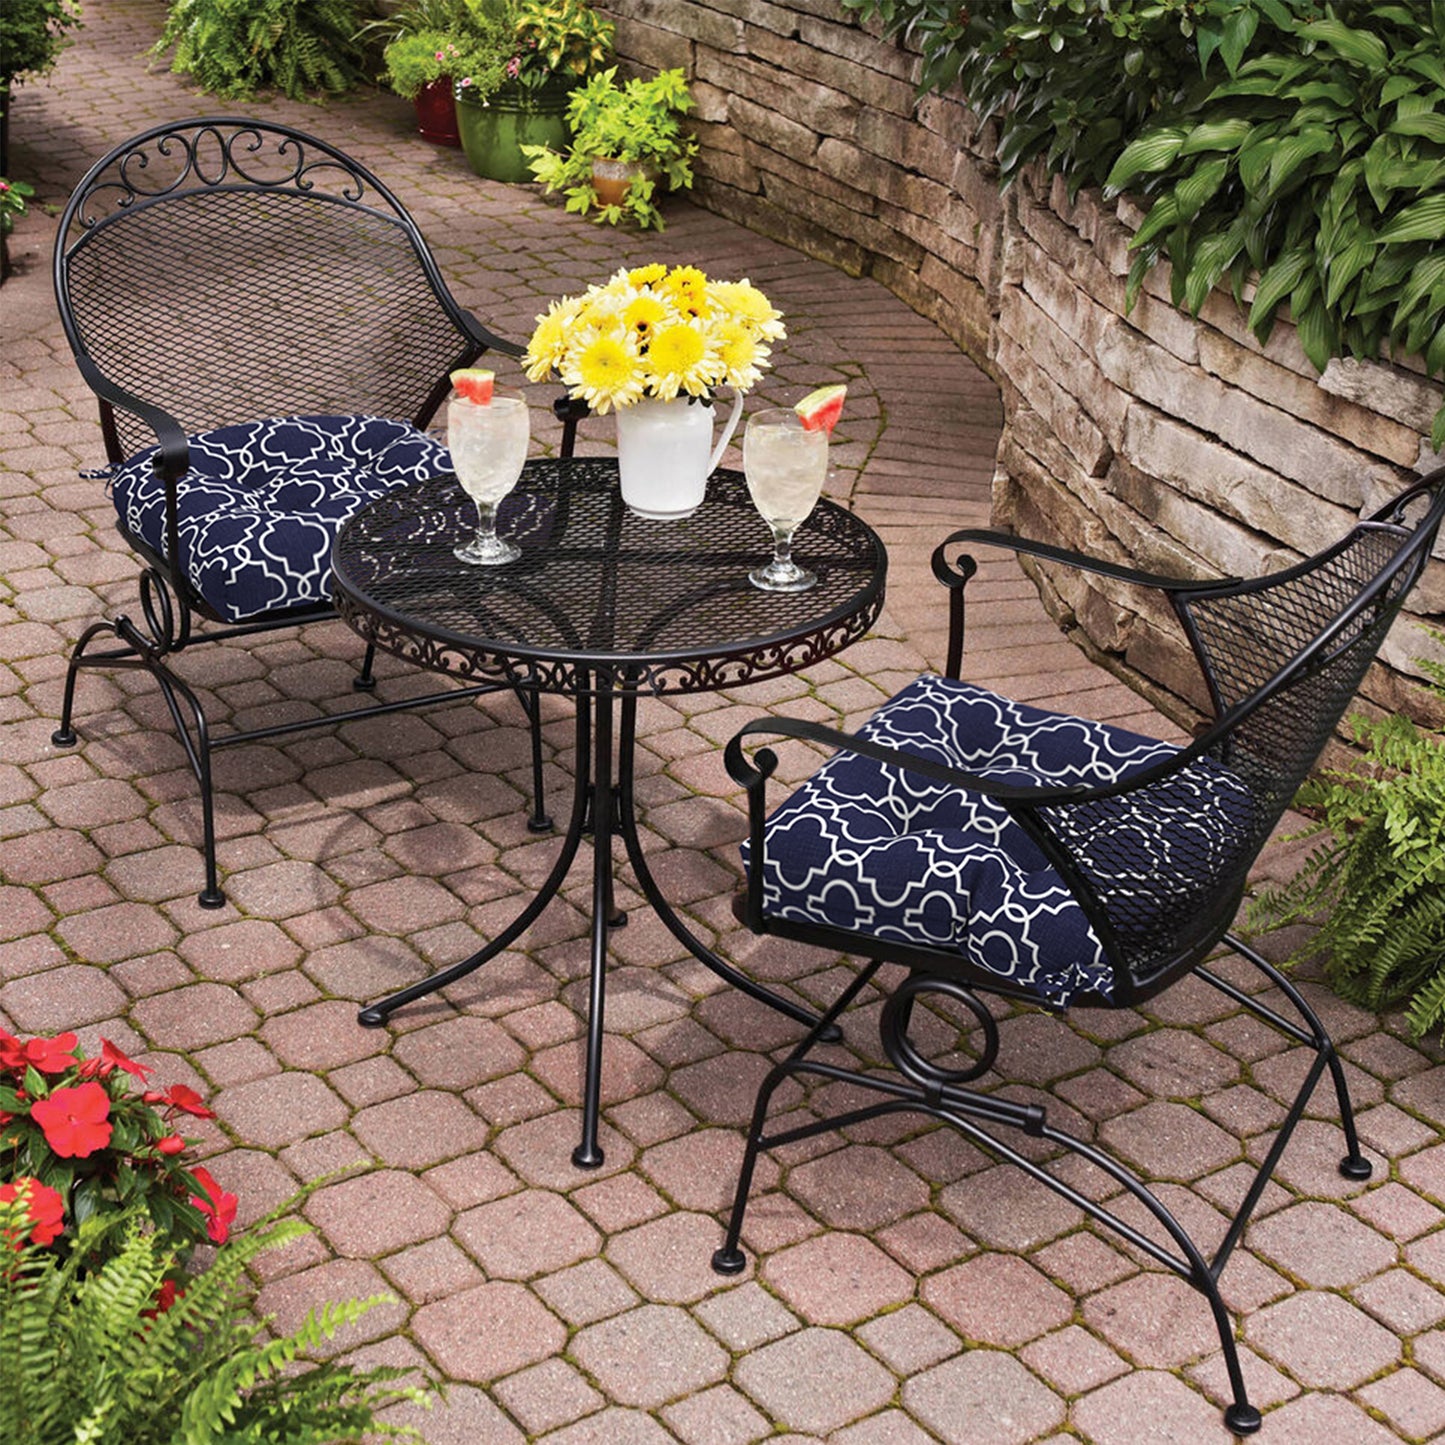 Melody Elephant Patio Wicker Chair Cushions, All Weather Outdoor Tufted Chair Pads Pack of 2, 19 x 19 x 5 Inch U-Shaped Seat Cushions of Garden Furniture Decoration, Carmody Navy